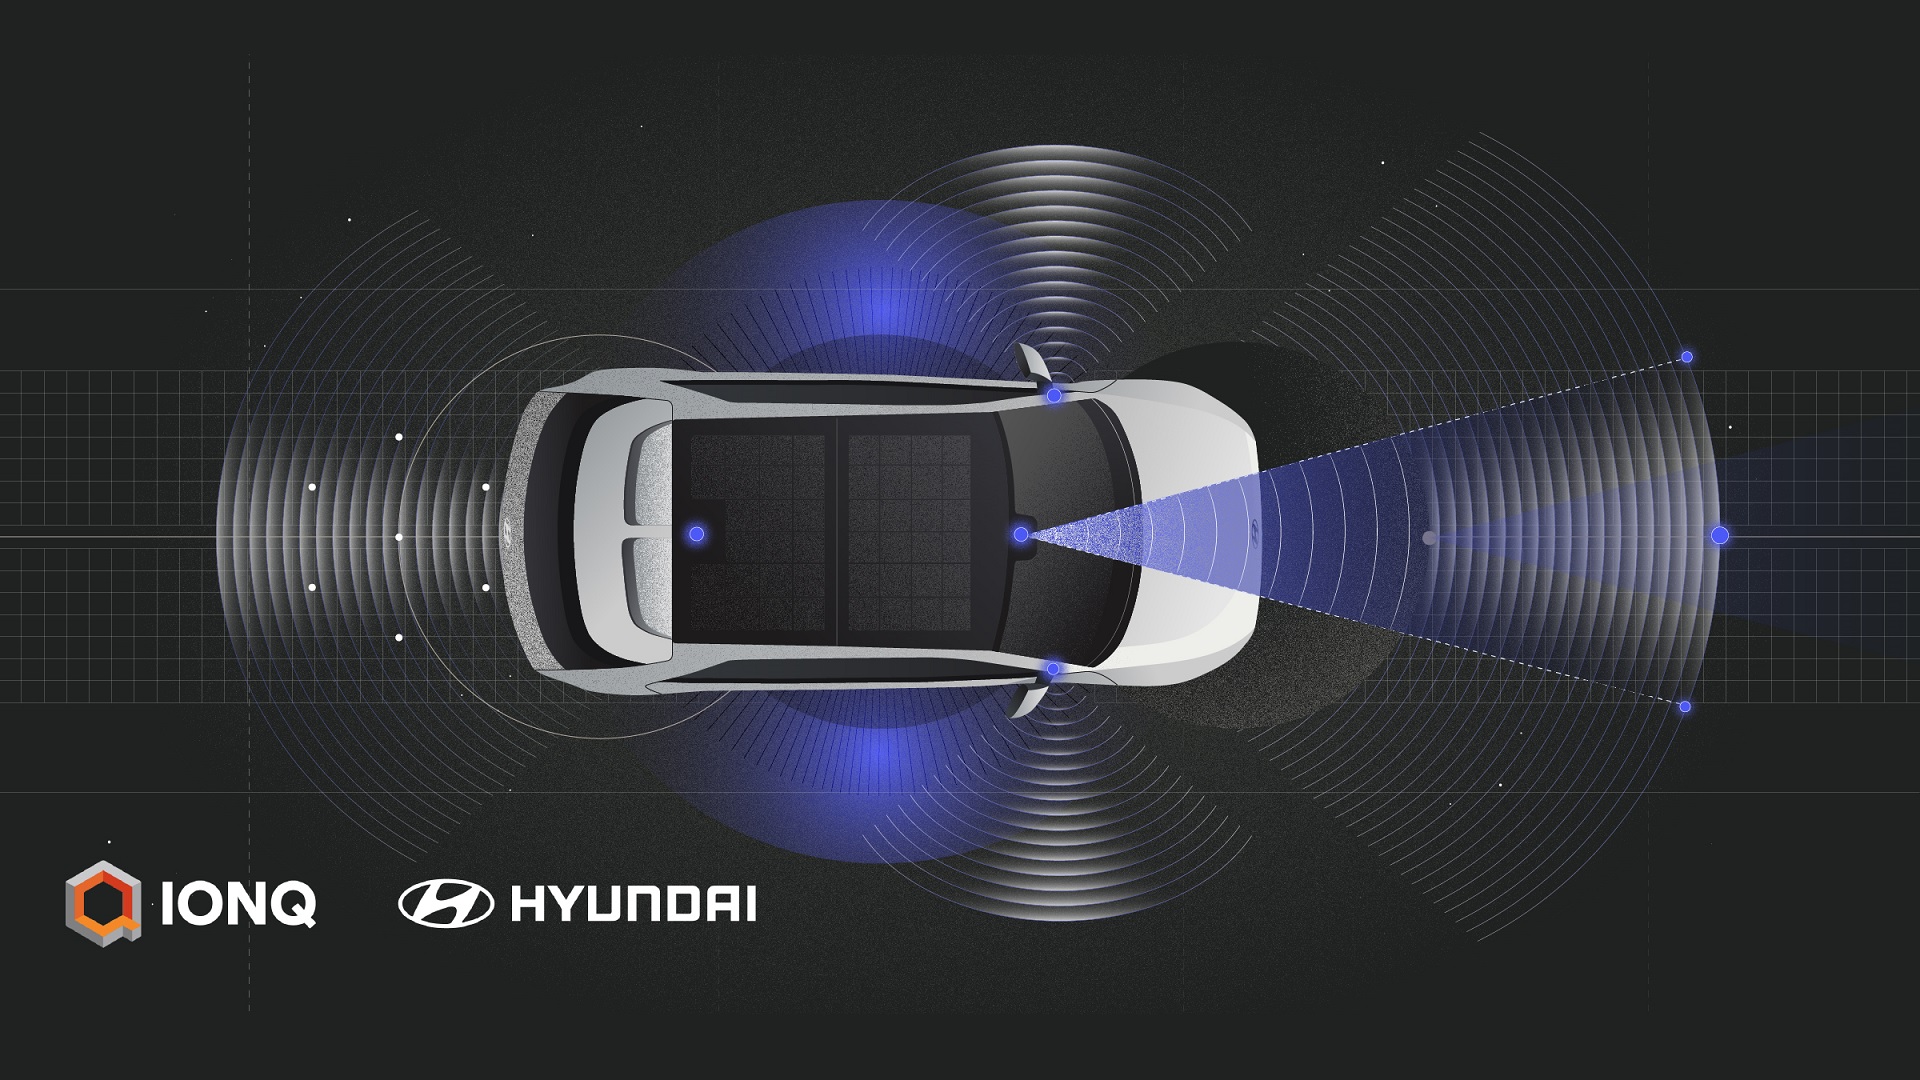 IonQ and Hyundai Motor Expand Partnership to Use Quantum Computing for Object Detection